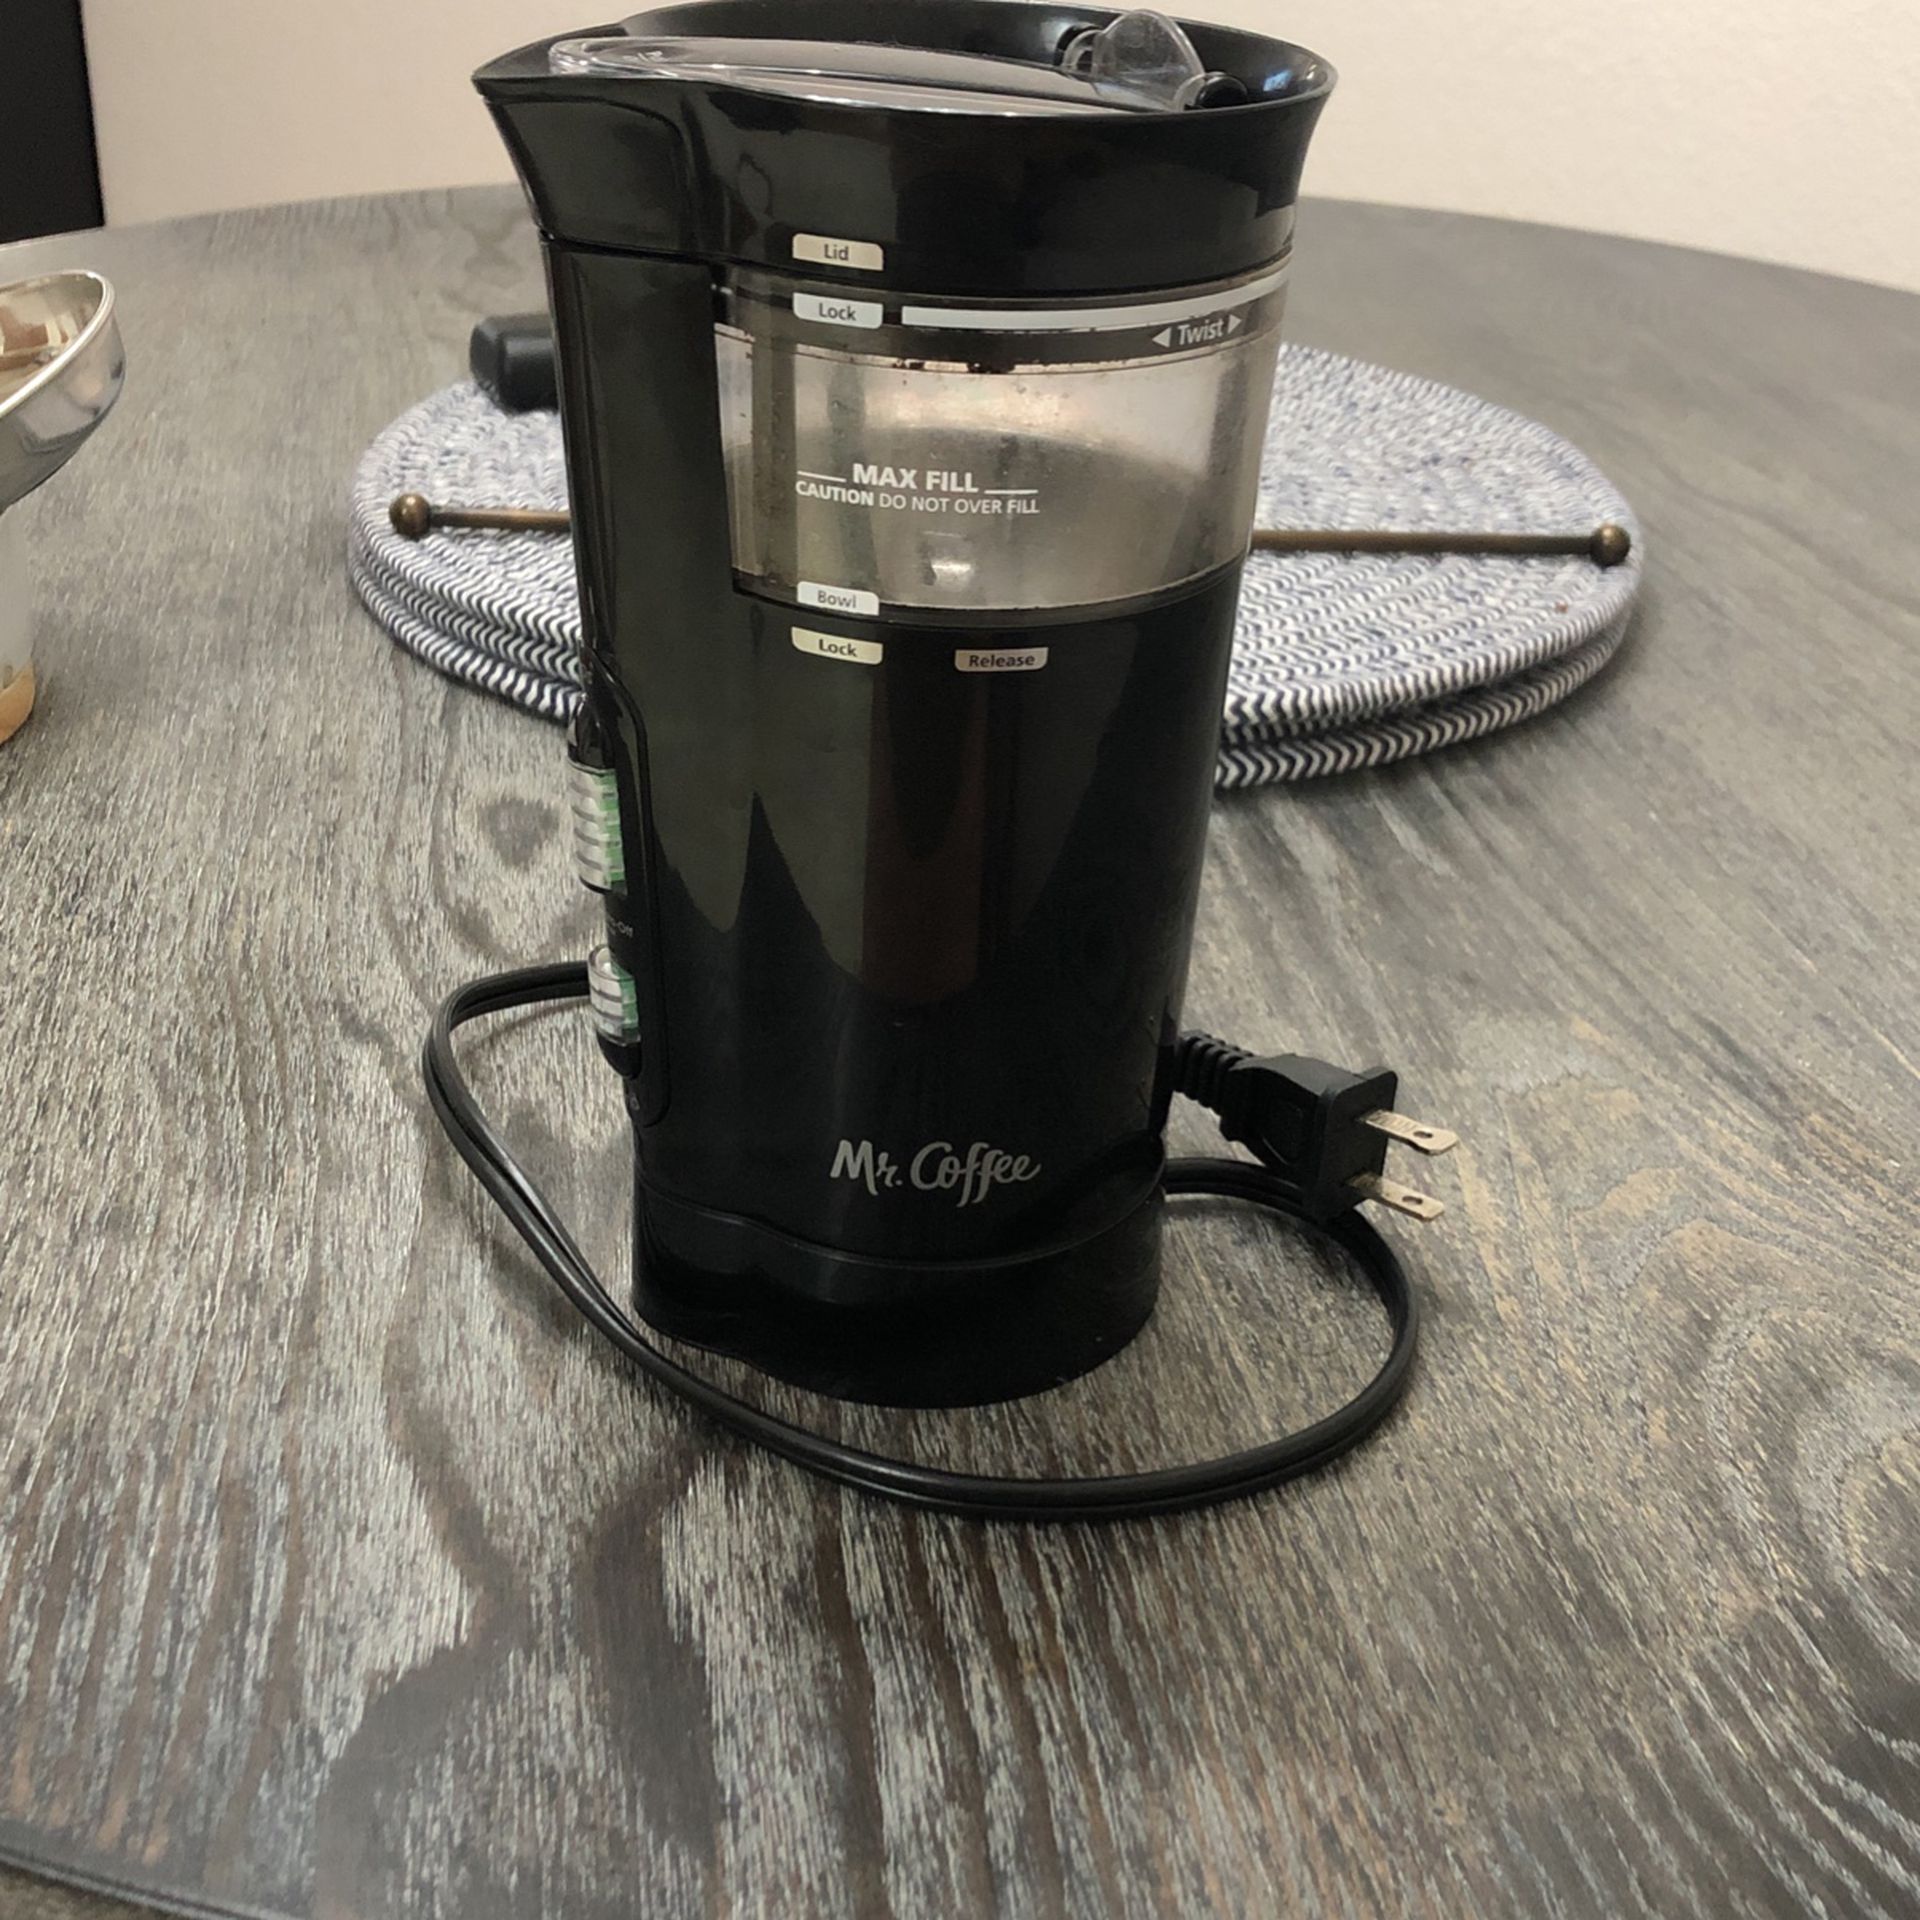 Mr. Coffee Coffee Grinder for Sale in Manteca, CA - OfferUp